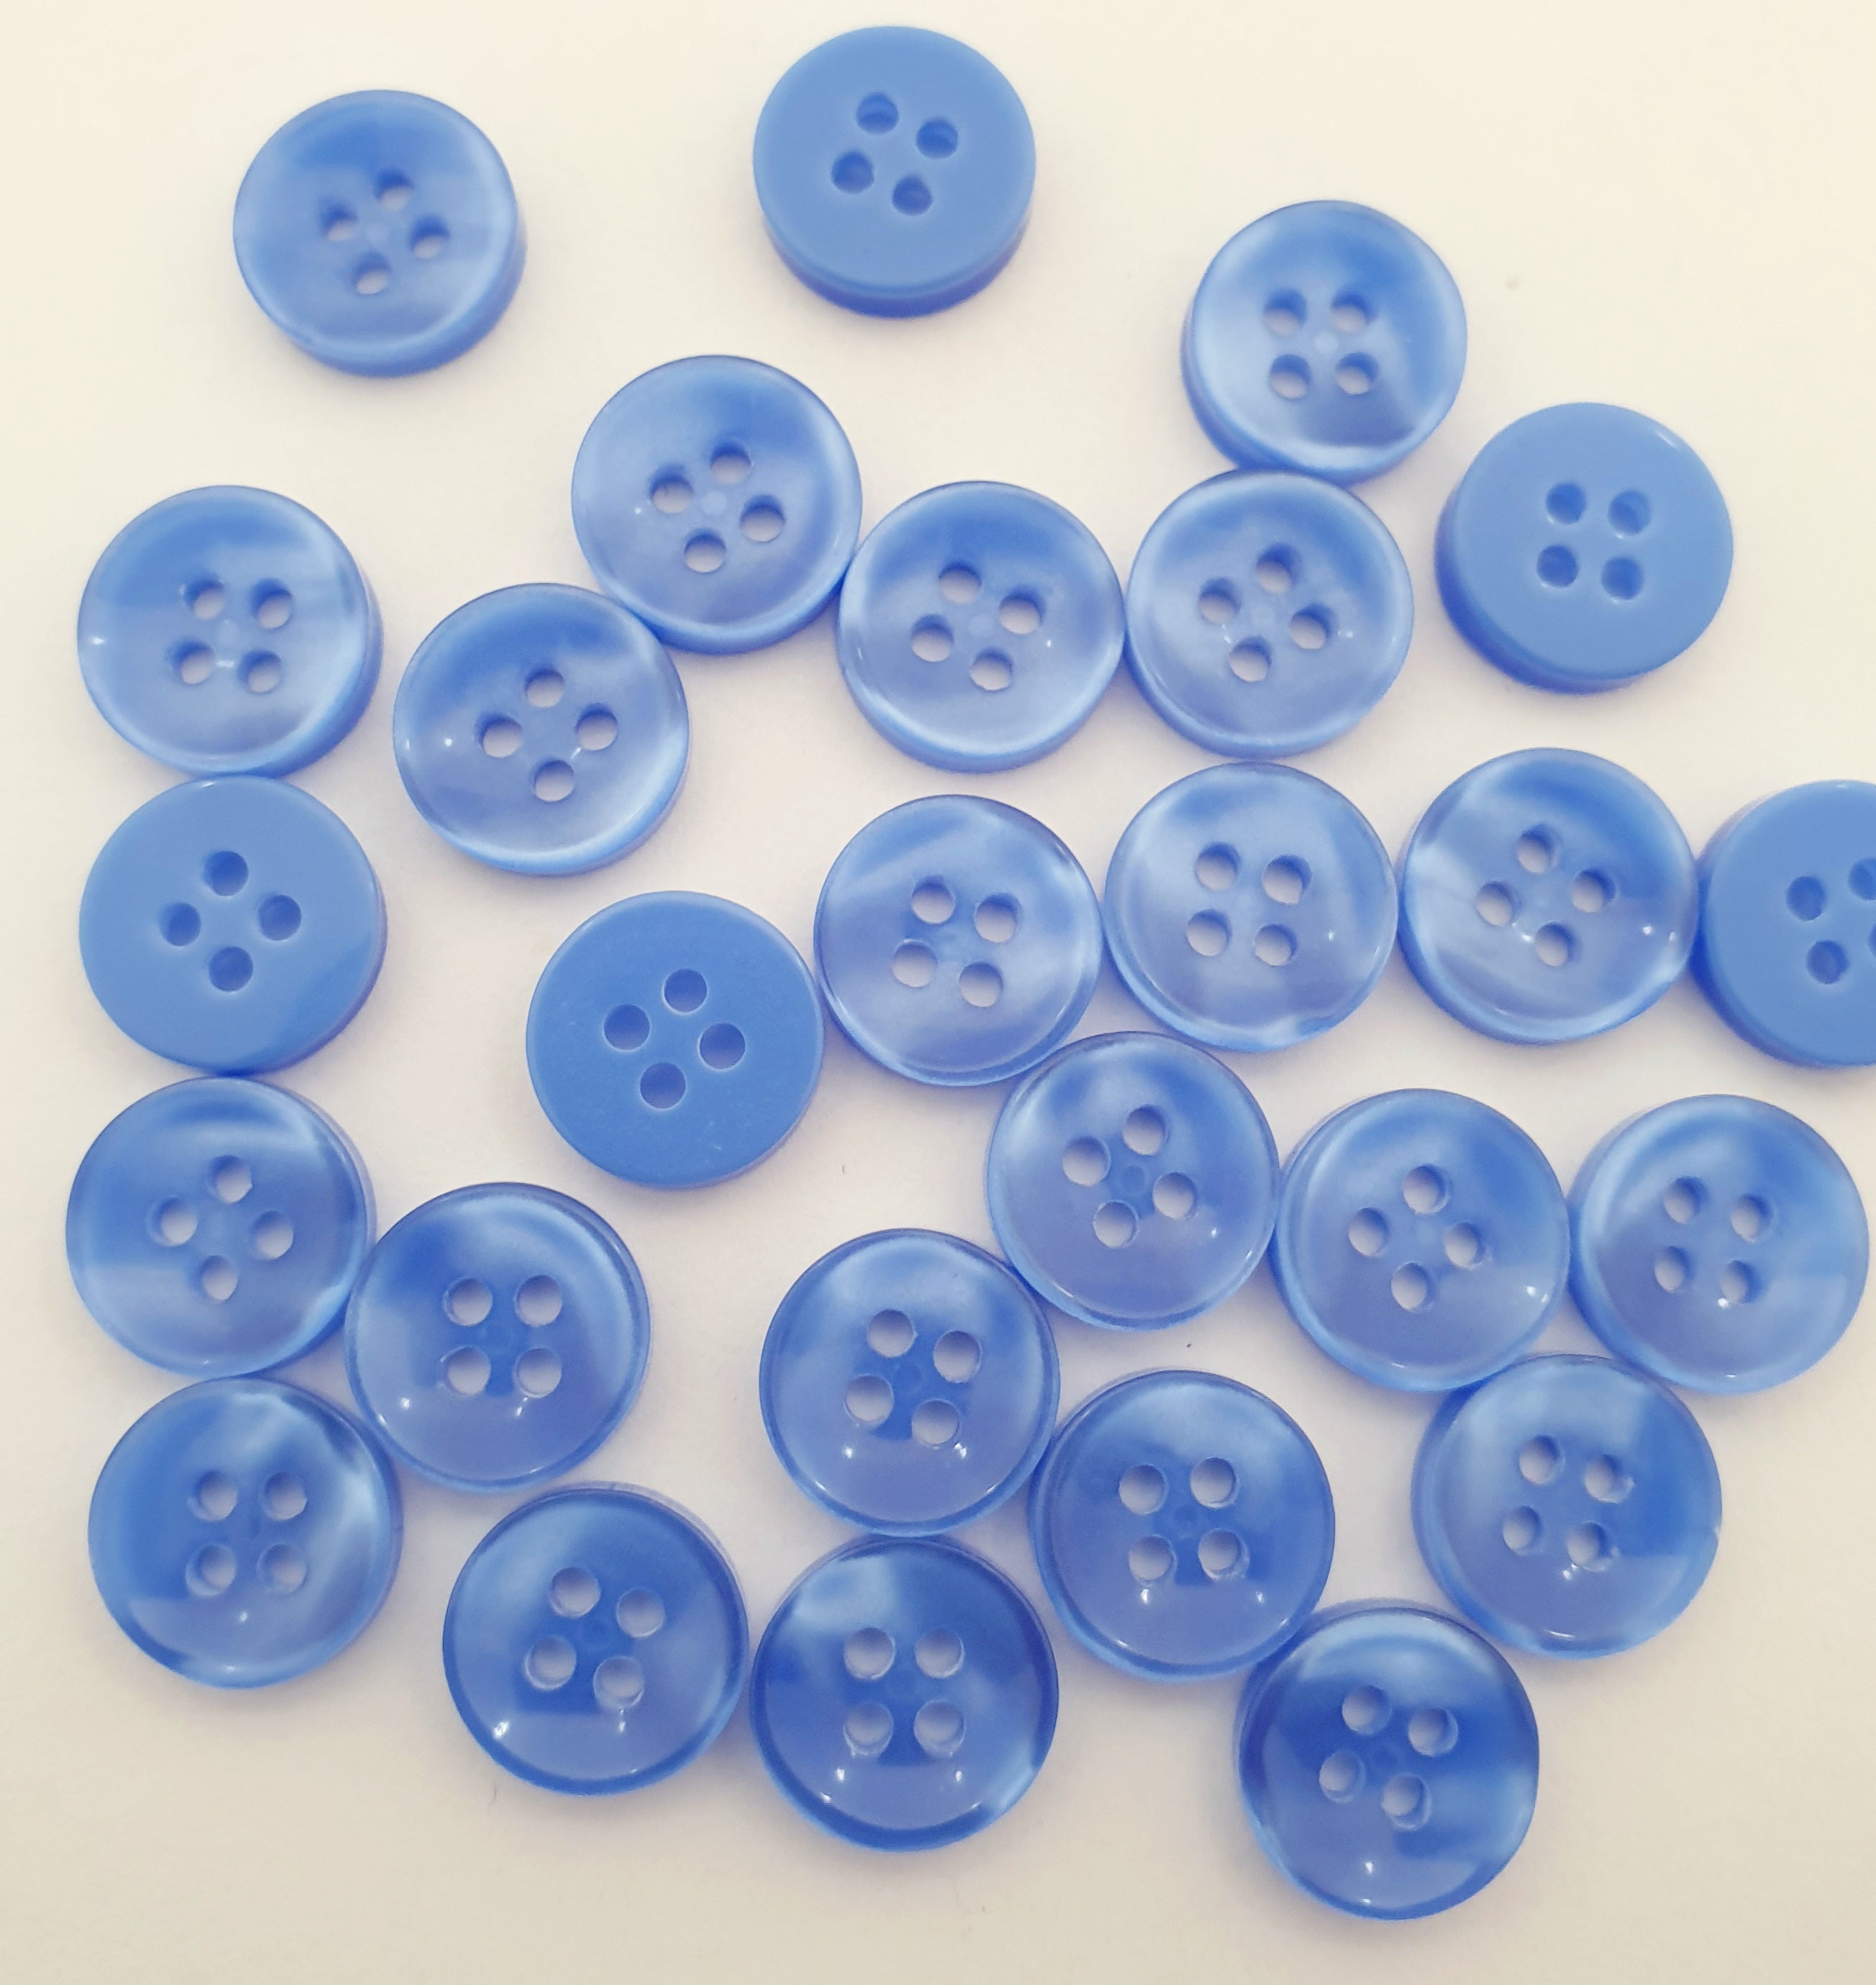 MajorCrafts 80pcs 11.5mm Sky Blue Pearlescent 4 Holes High-Grade Round Resin Small Sewing Buttons